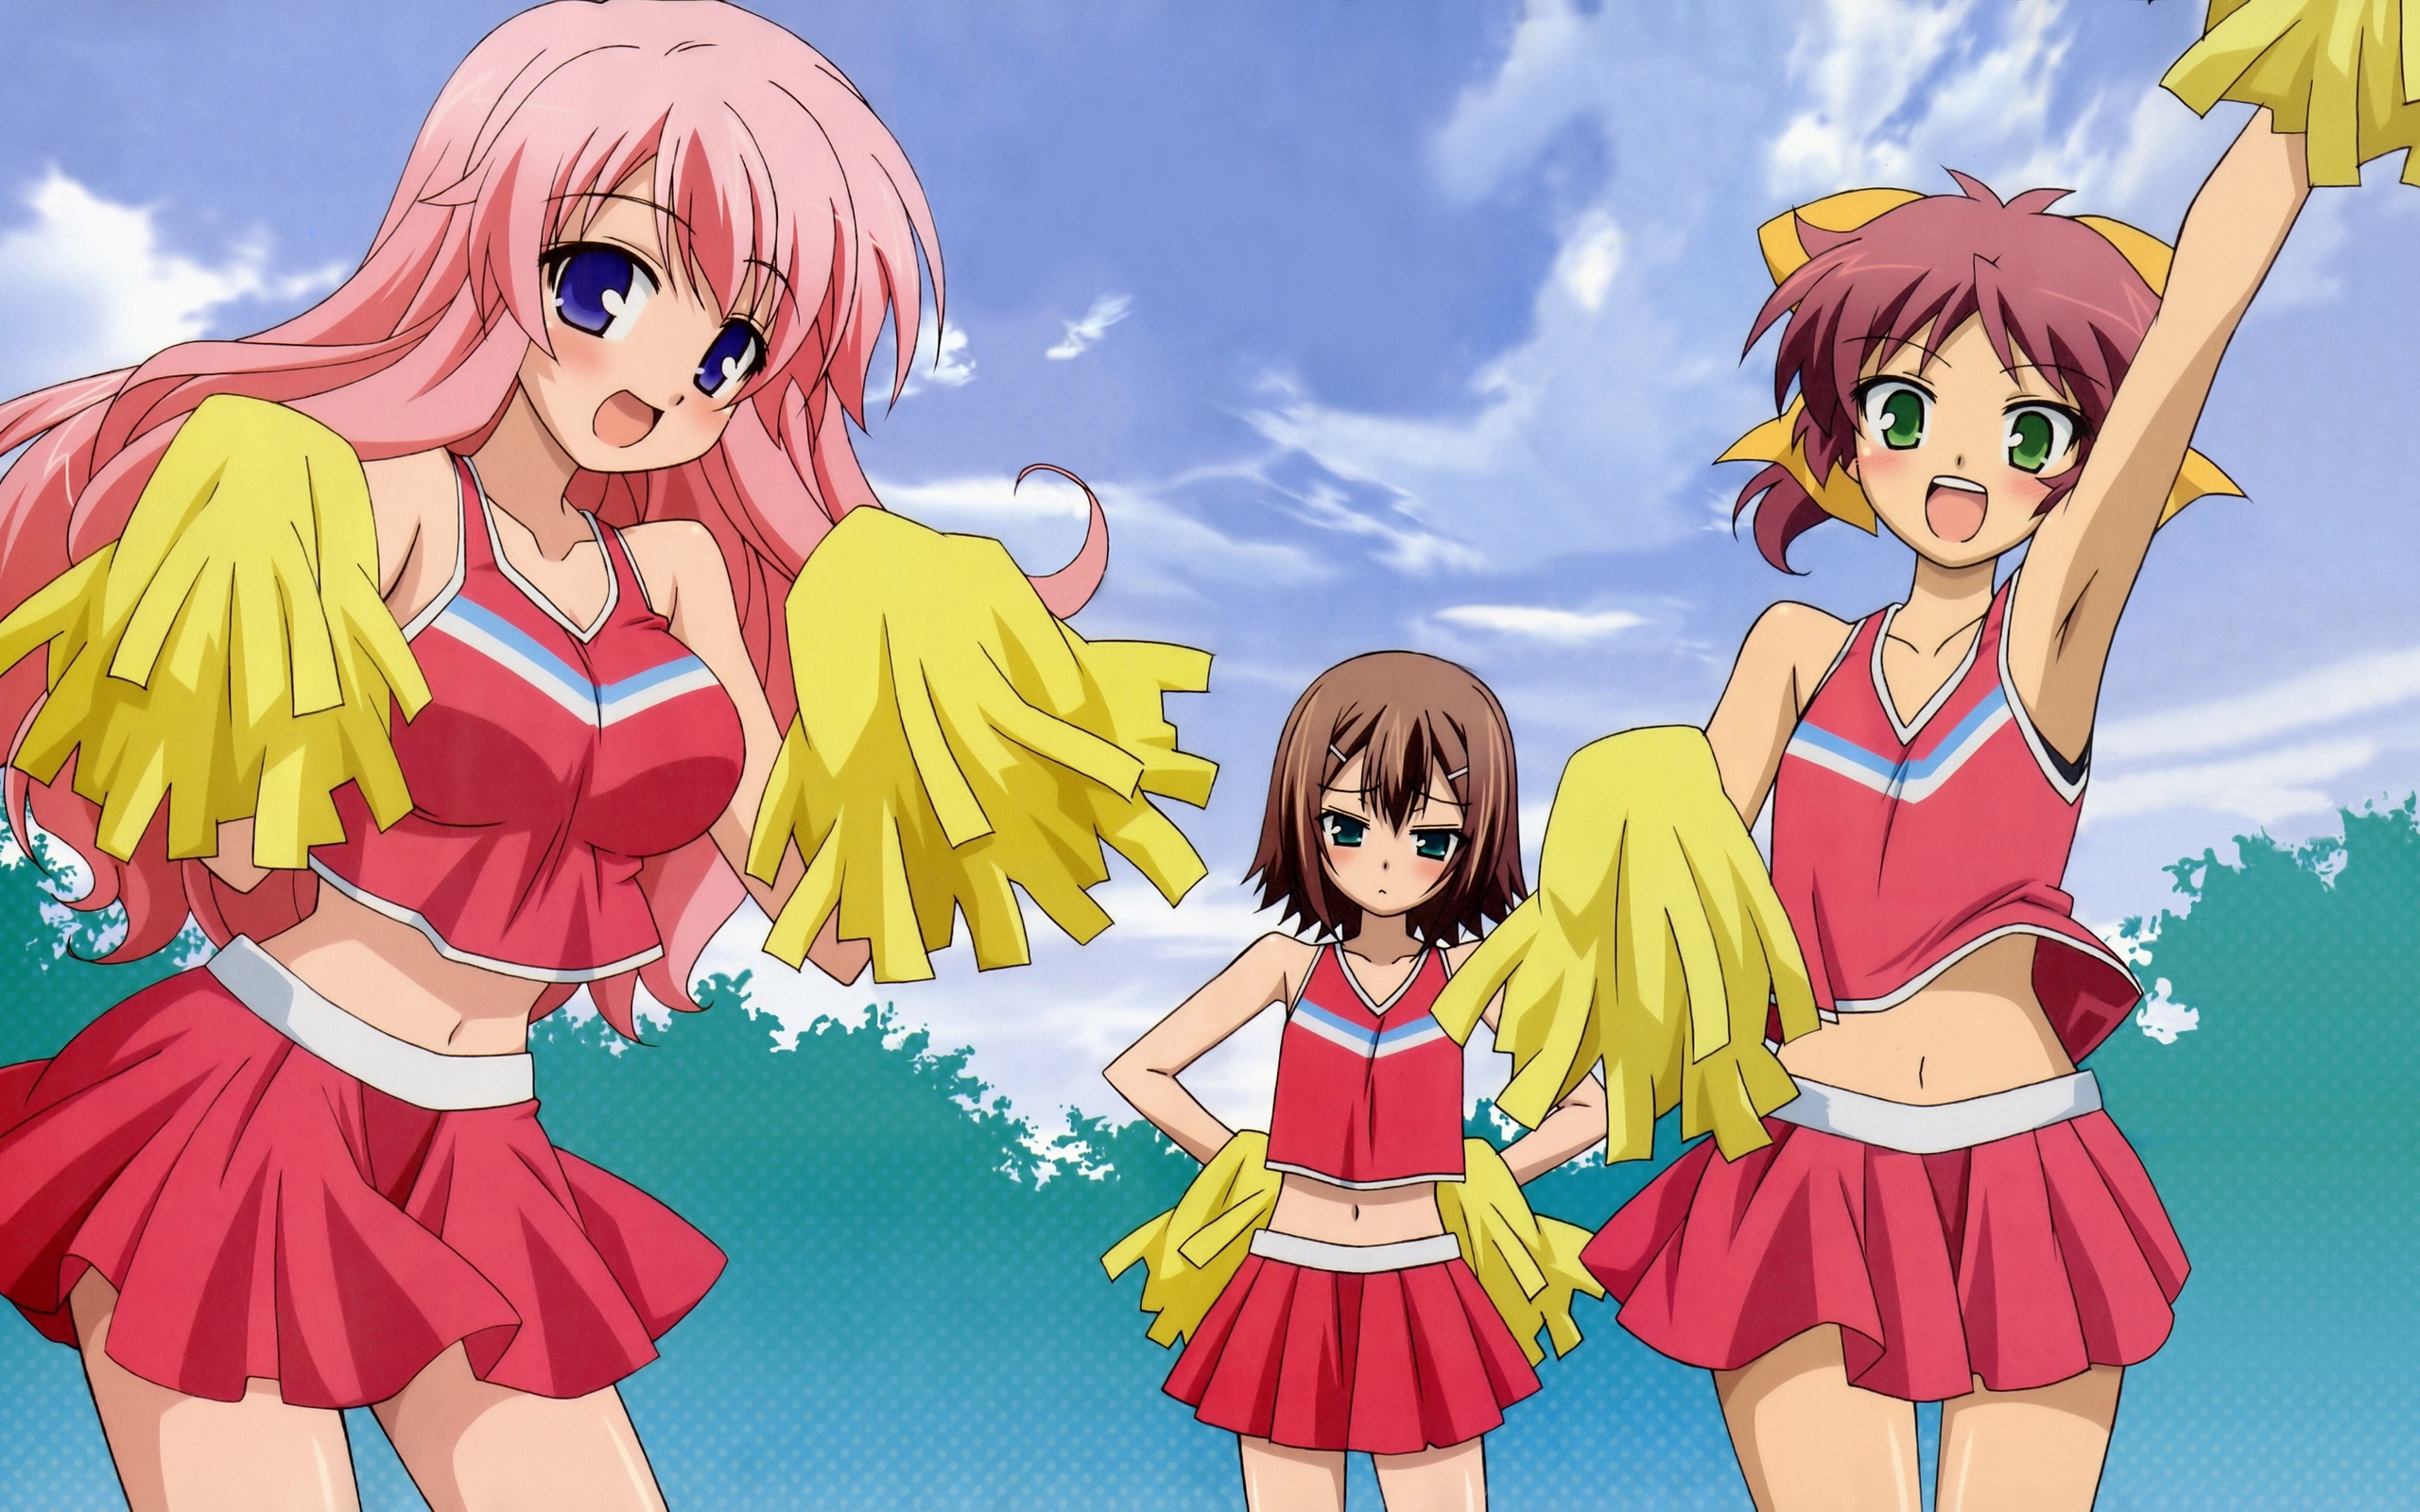 Download wallpaper 2560x1600 anime, girls, group, support, dance